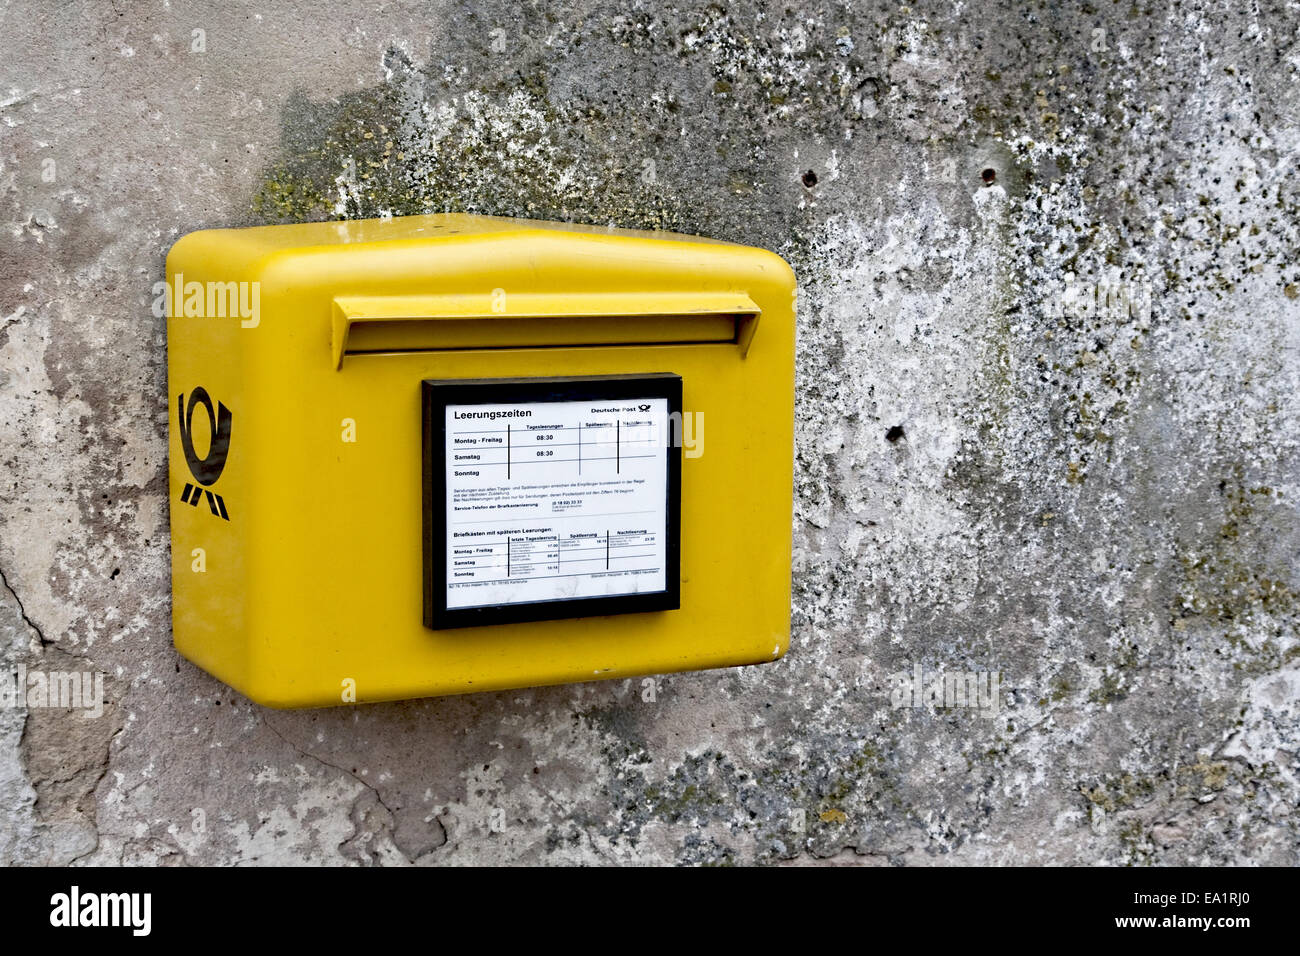 Briefkasten Leerung High Resolution Stock Photography and Images - Alamy